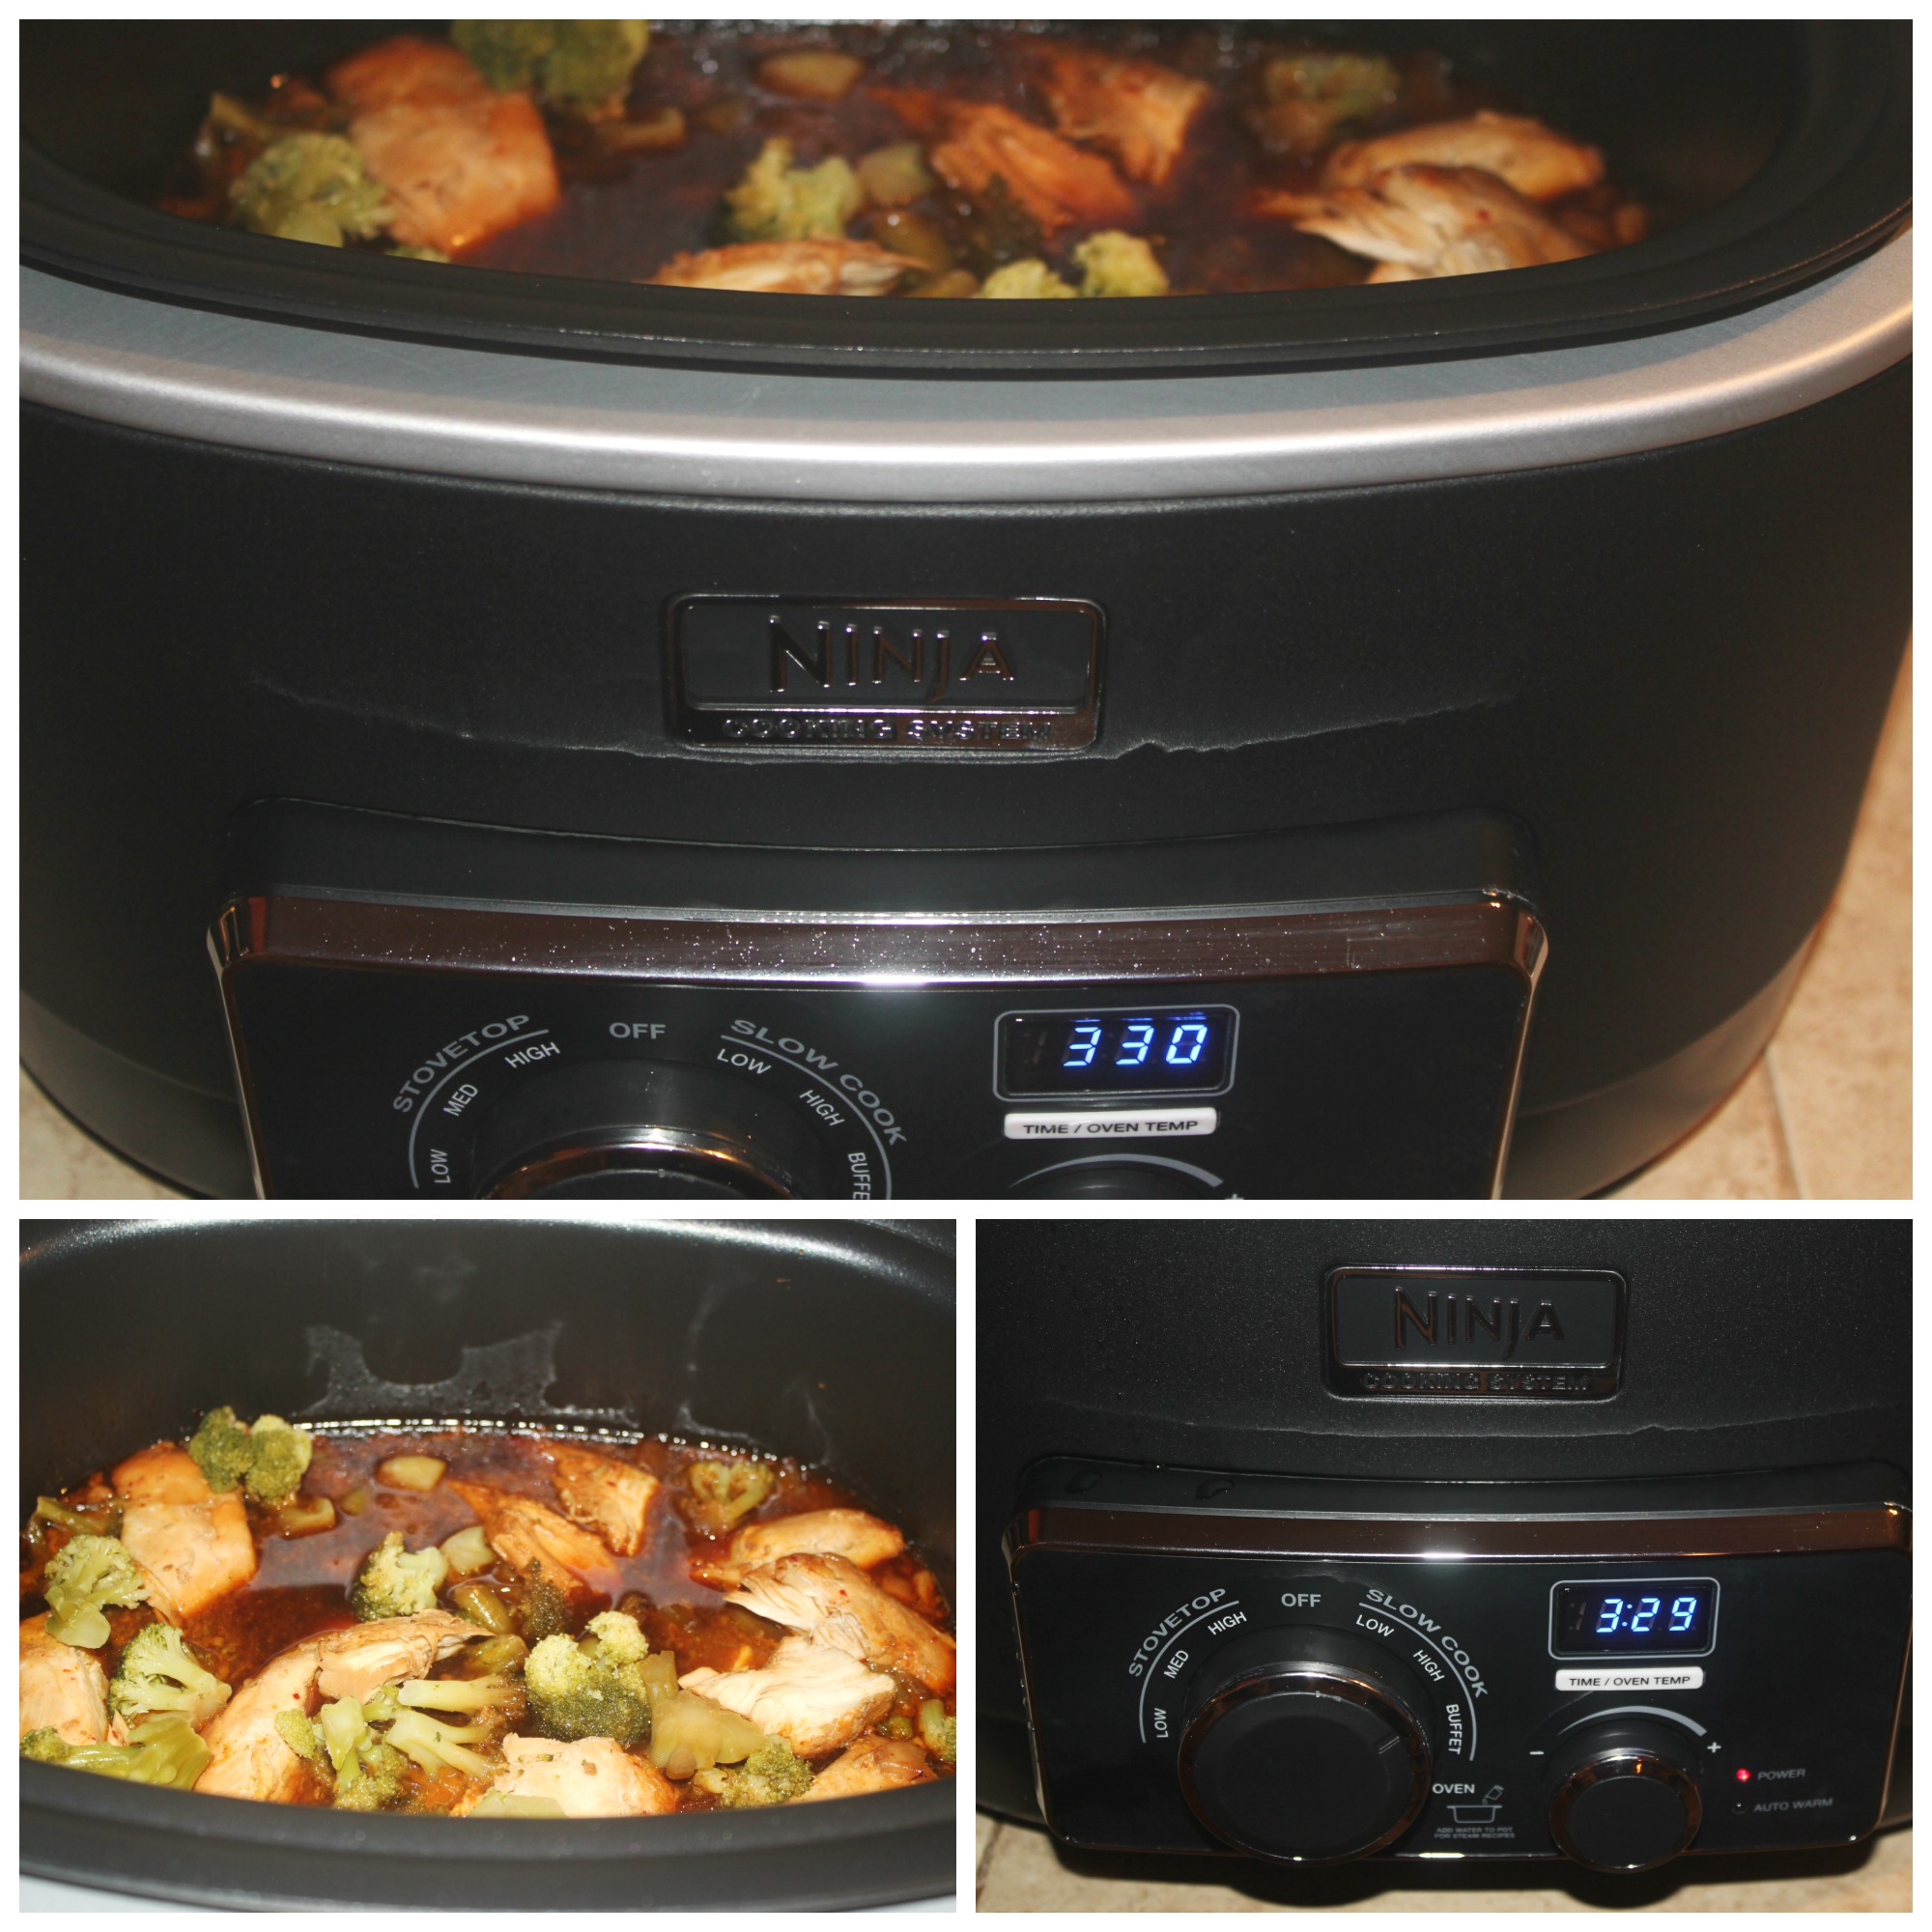 Slow-cooker recipes and review: Ninja Cooking System 